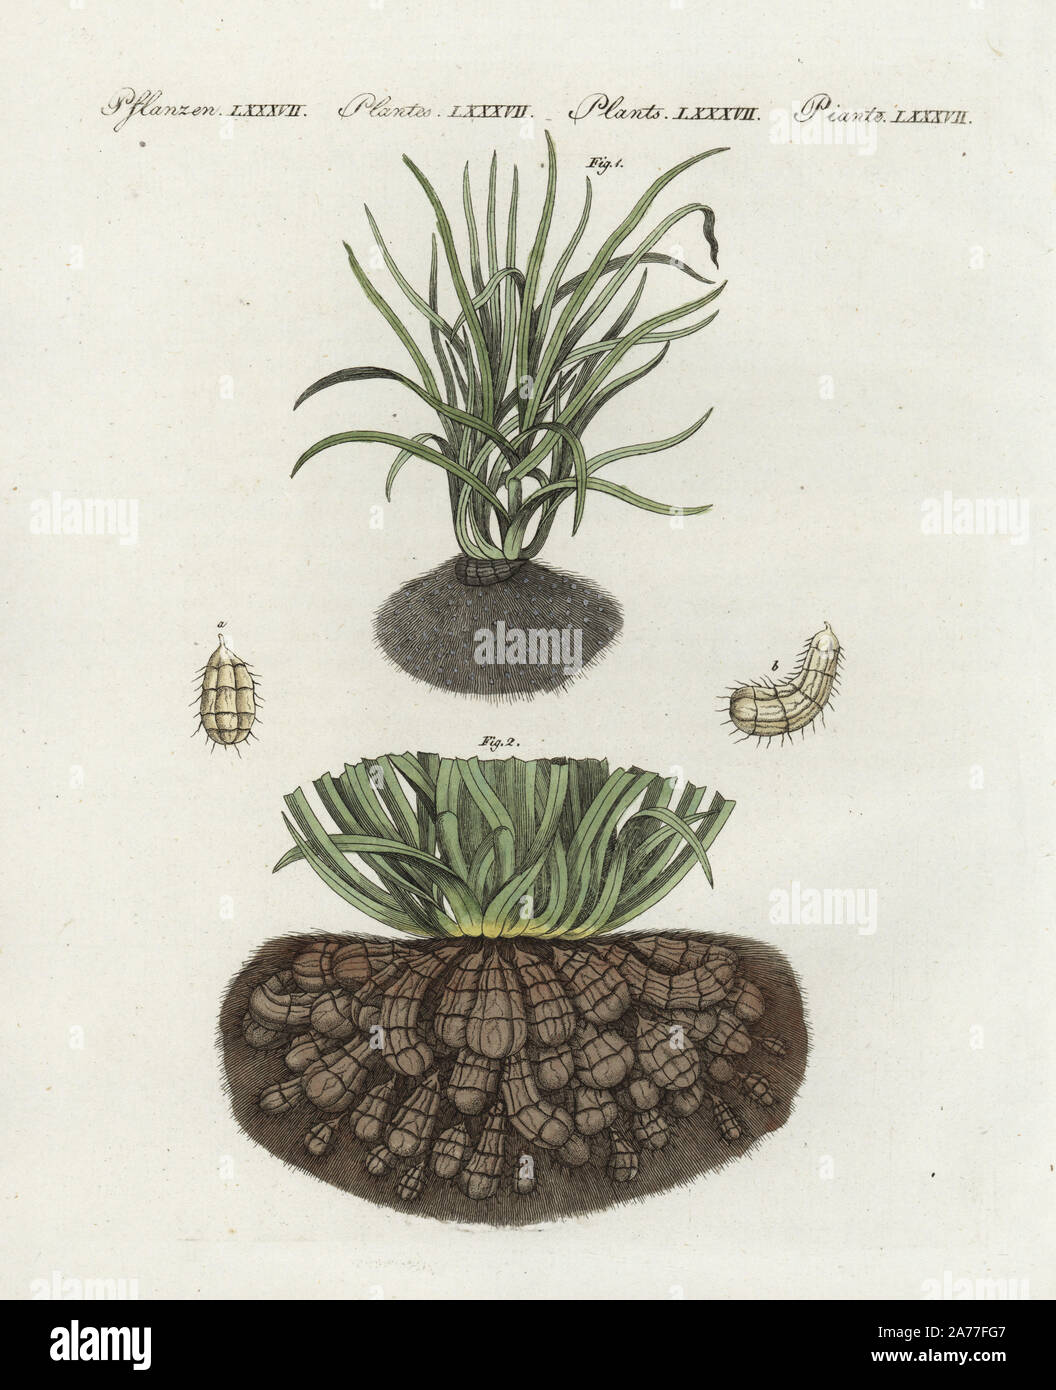 Chufa or tigernut sedge, Cyperus esculentus 1, tuberous roots 2, and earth almonds a,b. Handcoloured copperplate engraving from Friedrich Johann Bertuch's Bilderbuch fur Kinder (Picture Book for Children), Weimar, 1802. Stock Photo